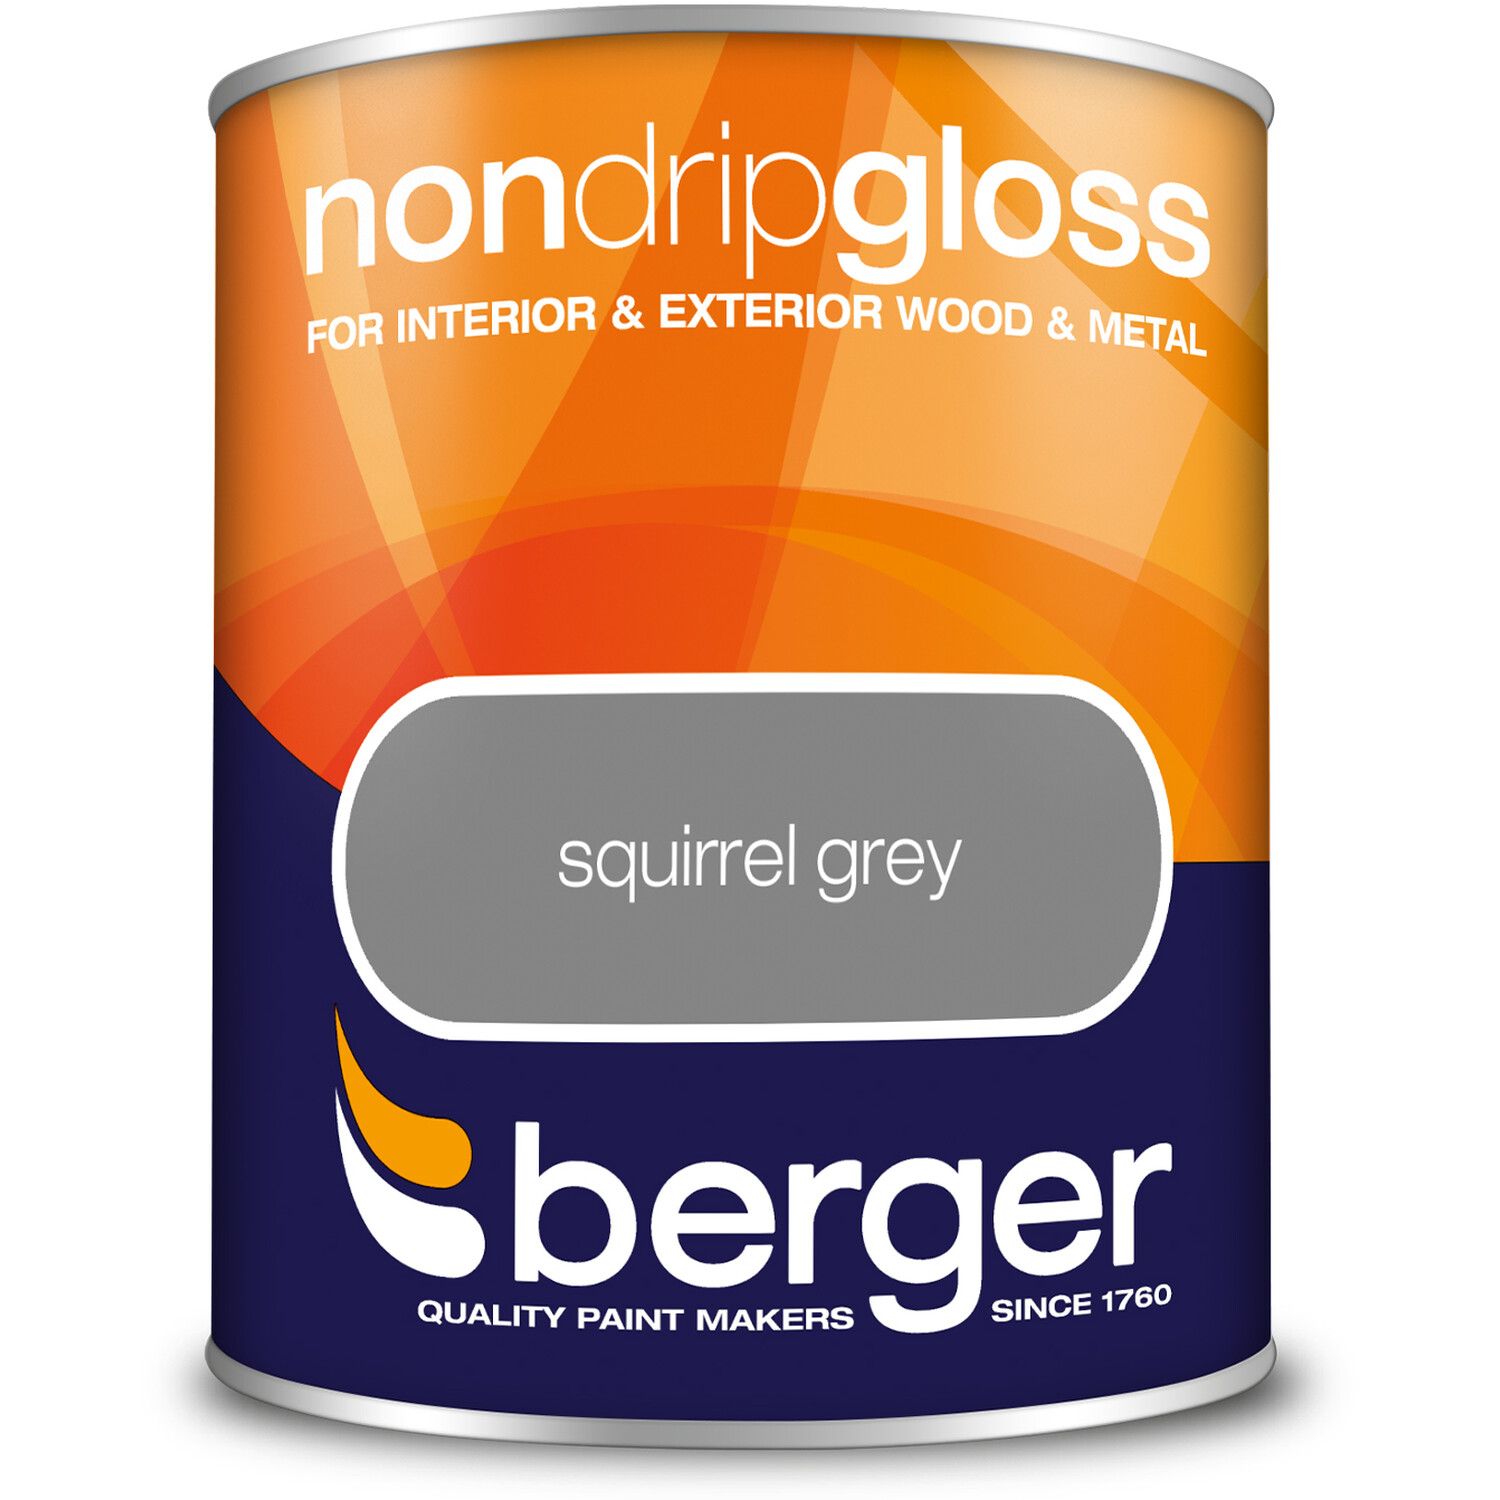 Berger Wood and Metal Squirrel Grey Non Drip Gloss Paint 750ml Image 2